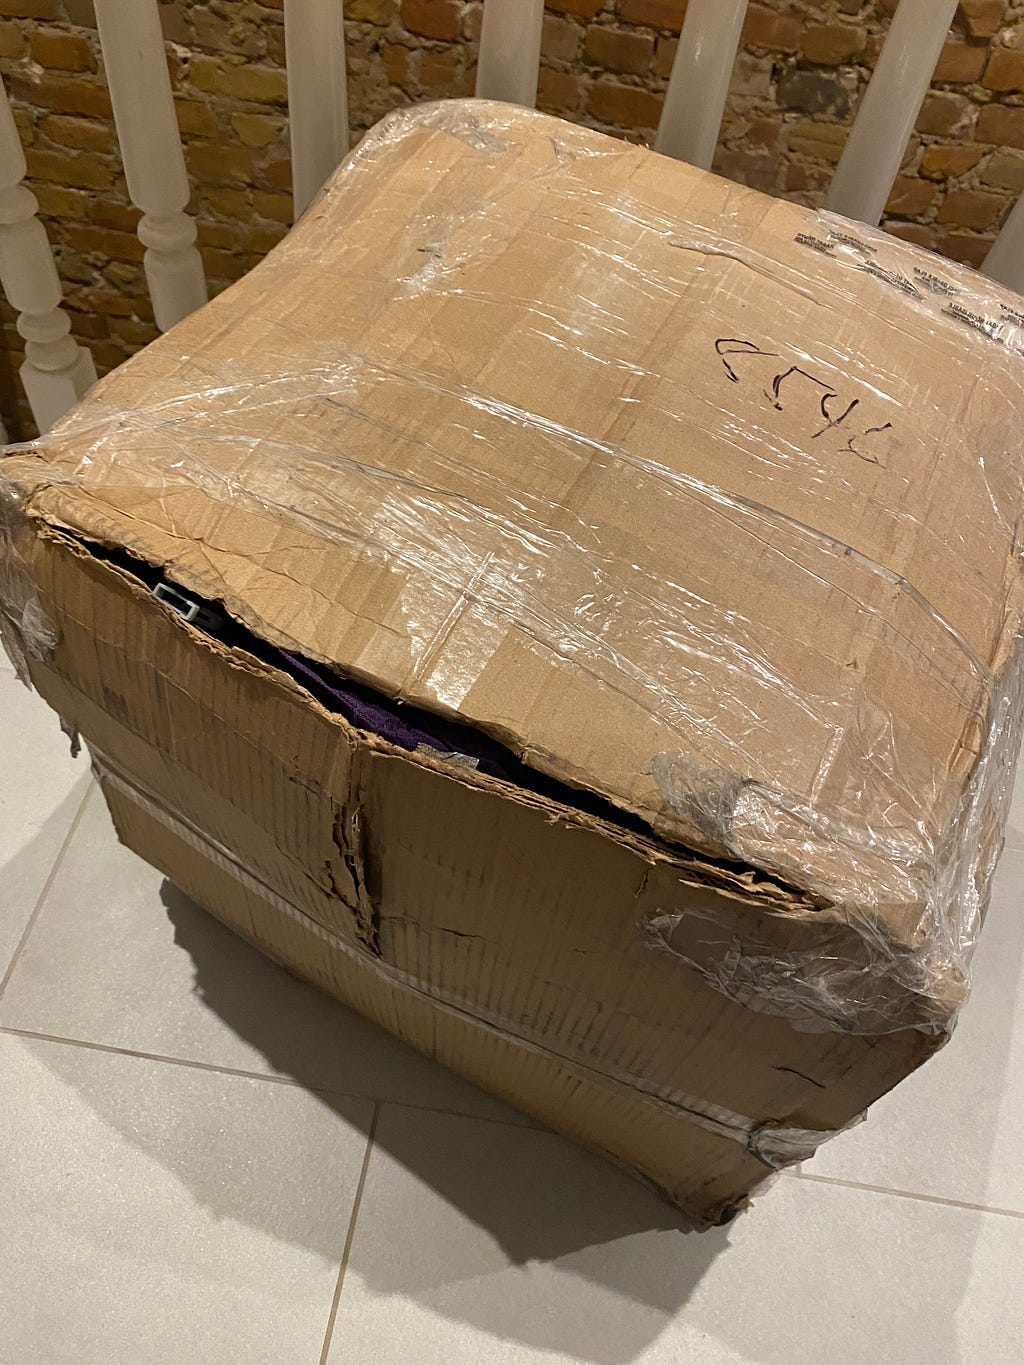 A cardboard box that has been through hell and back. Covered in tape, yet still gaping open, ripped pretty much everywhere. Um, yeah. Obviously tigers attacked it in the UPS holding station as punishment for me not paying the customs brokerage fees.